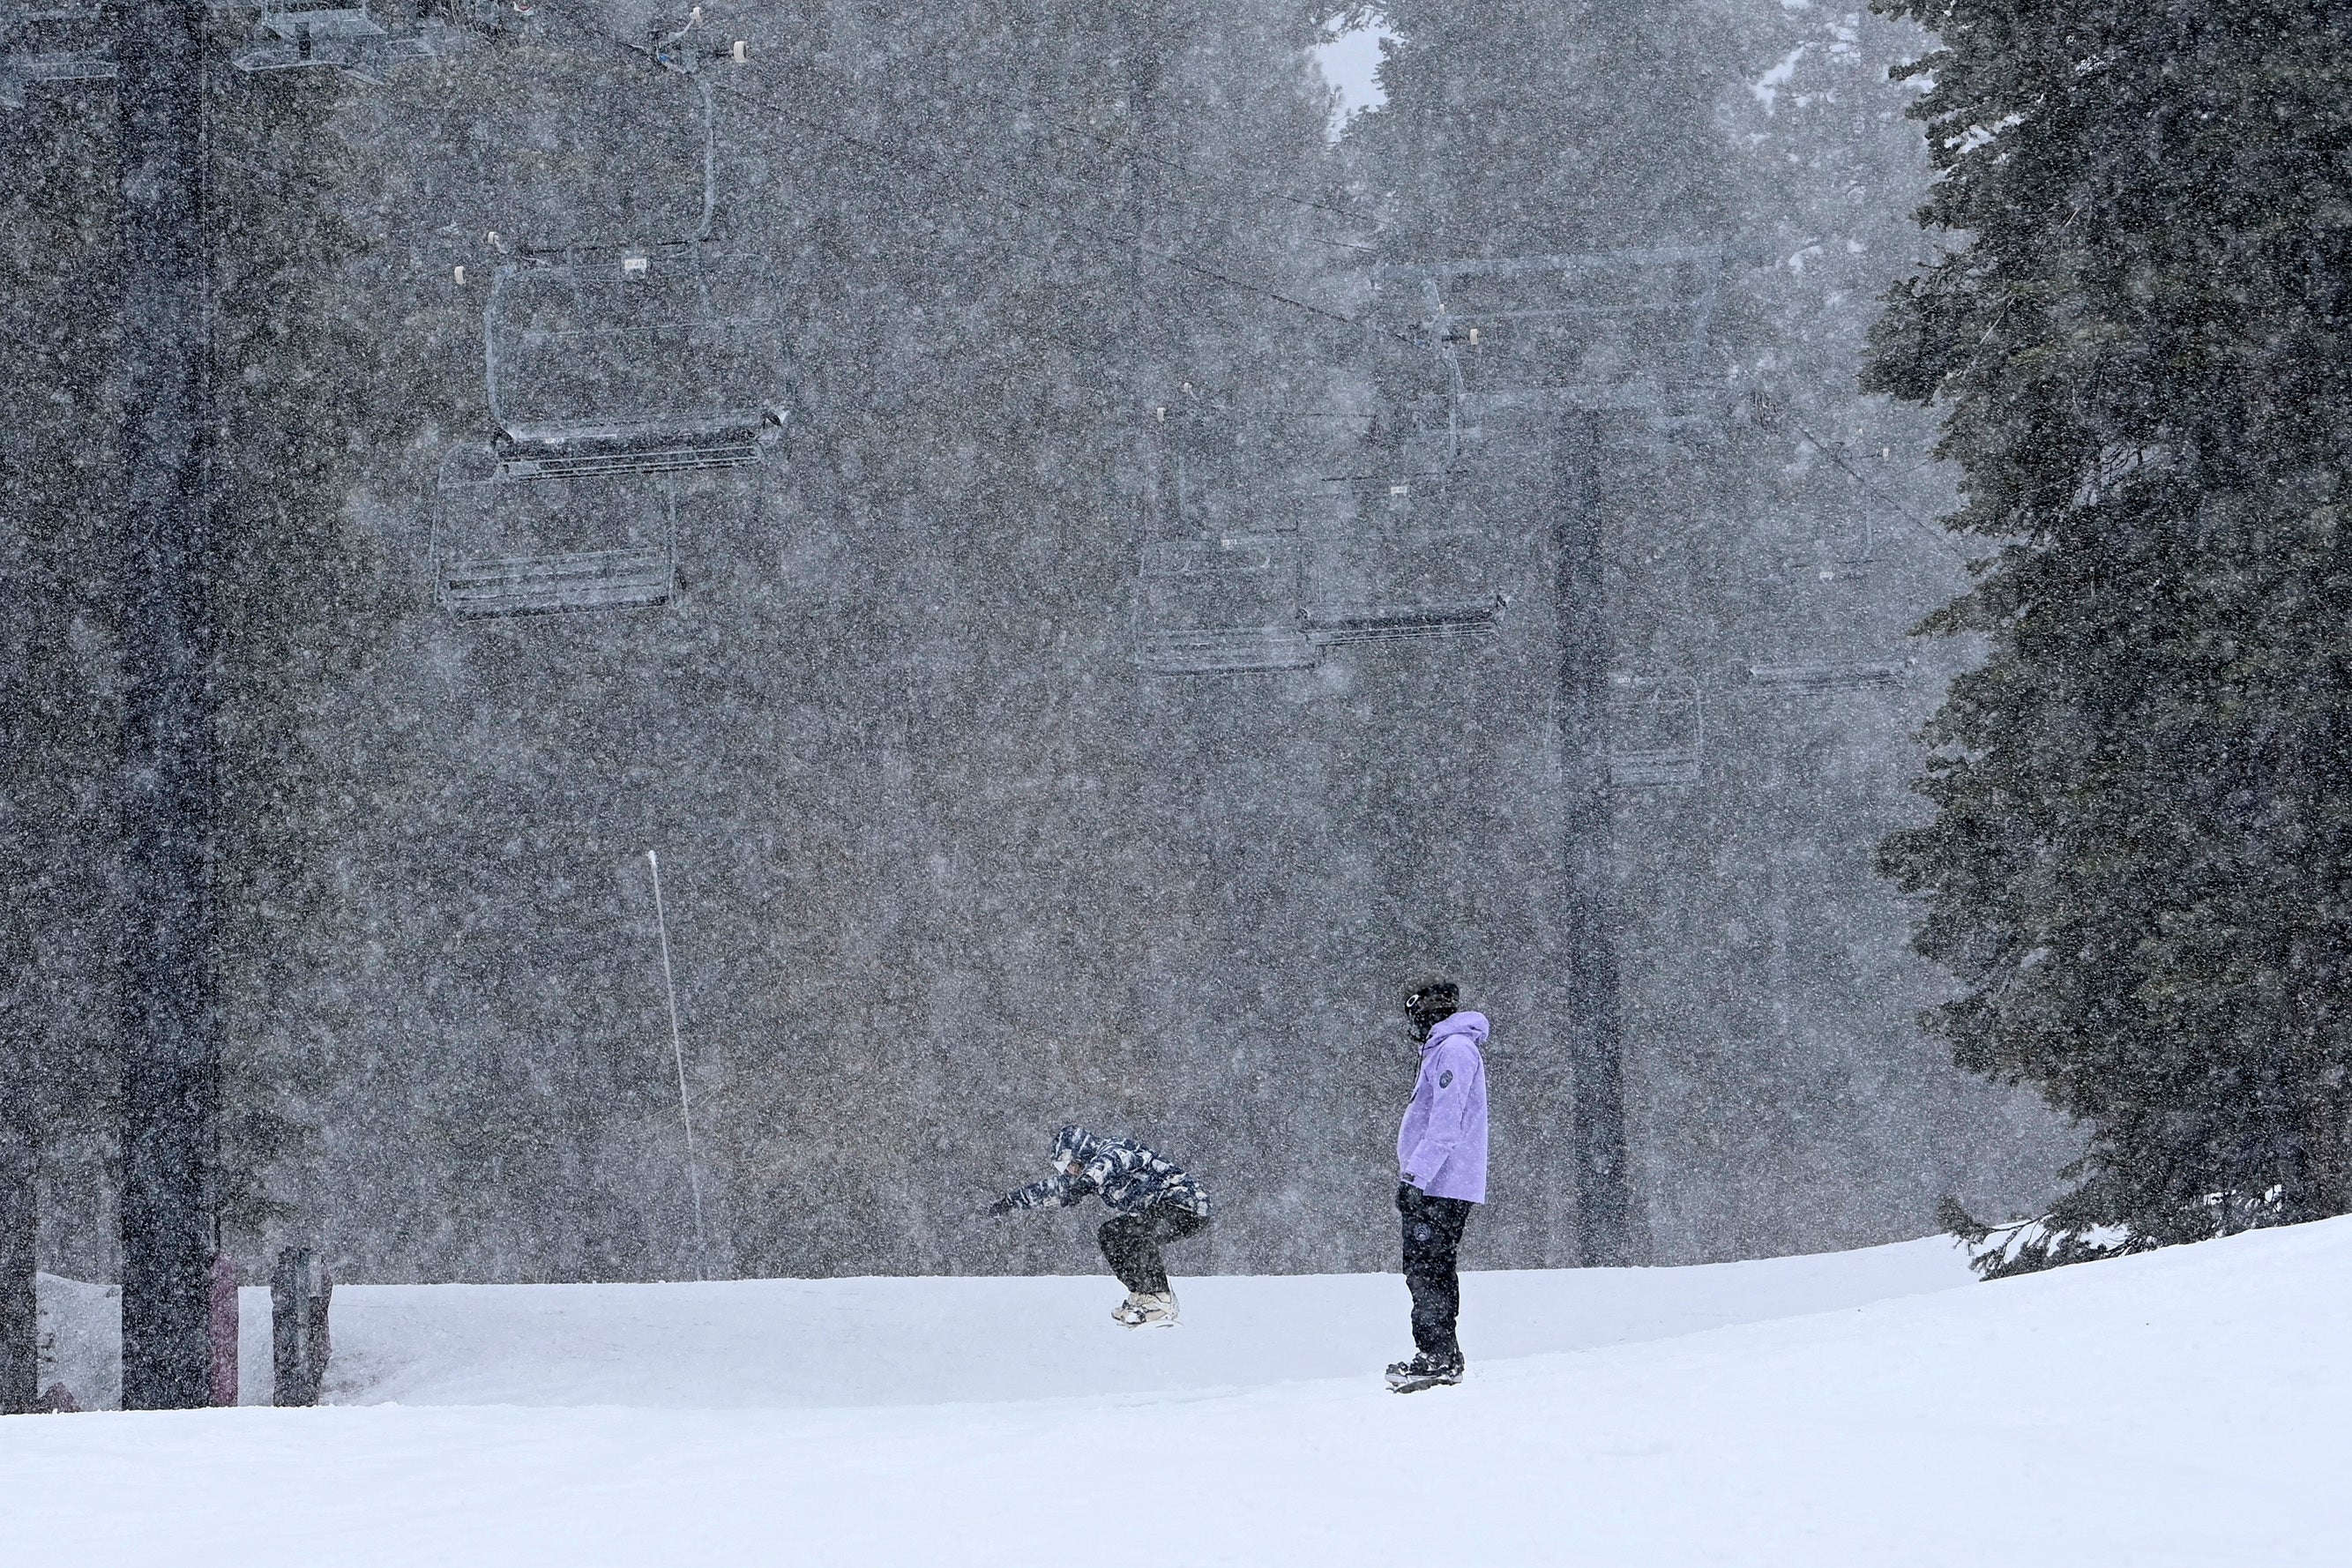 How much snow fell in Northern California and the Sierra Nevada? Snowfall over 7 feet